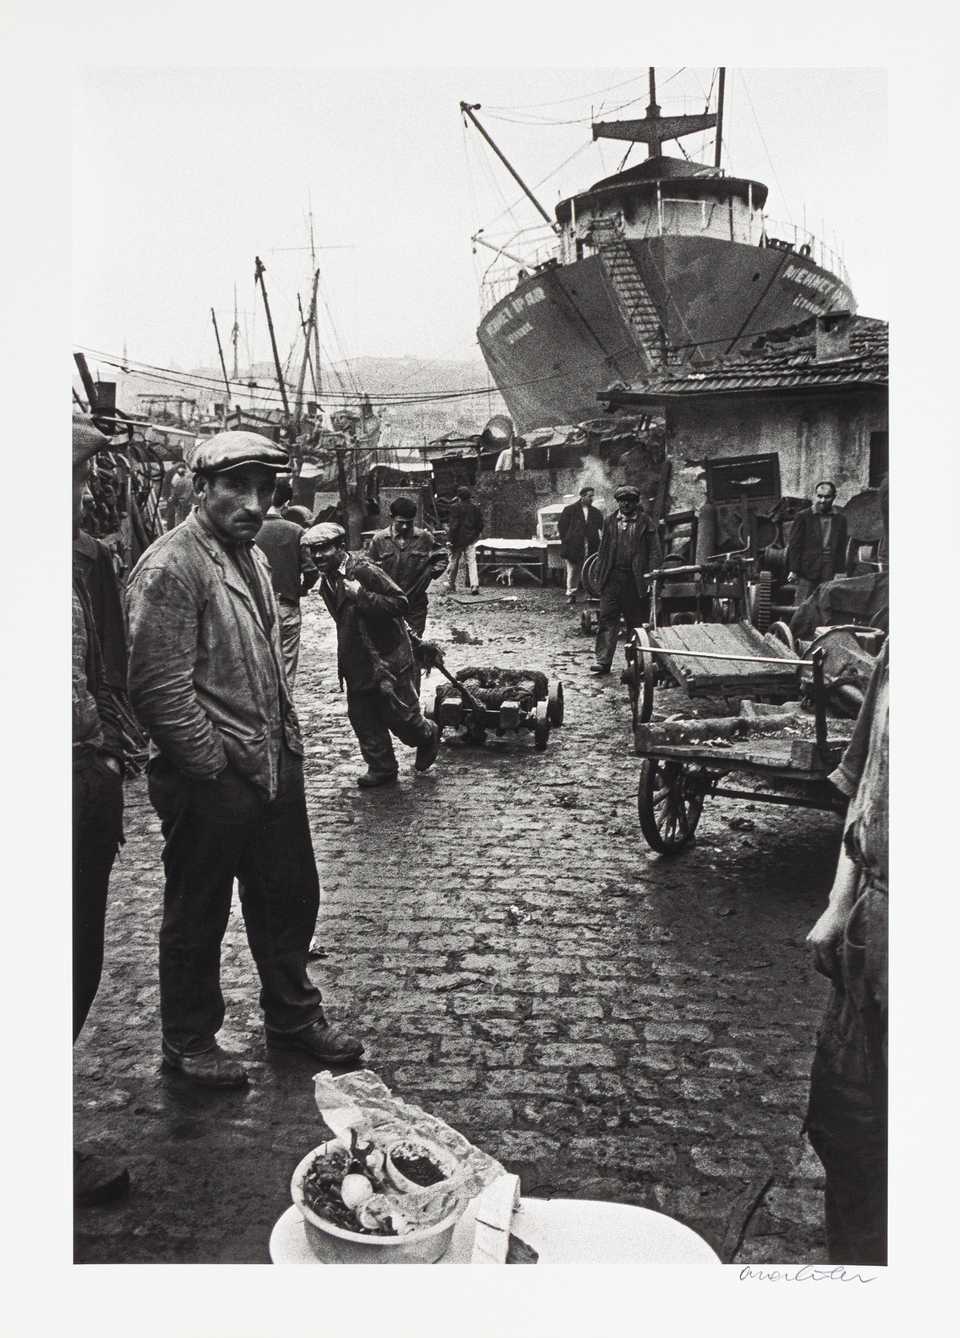 “A ship and workers at the caulking yard in Karakoy”, 1957.